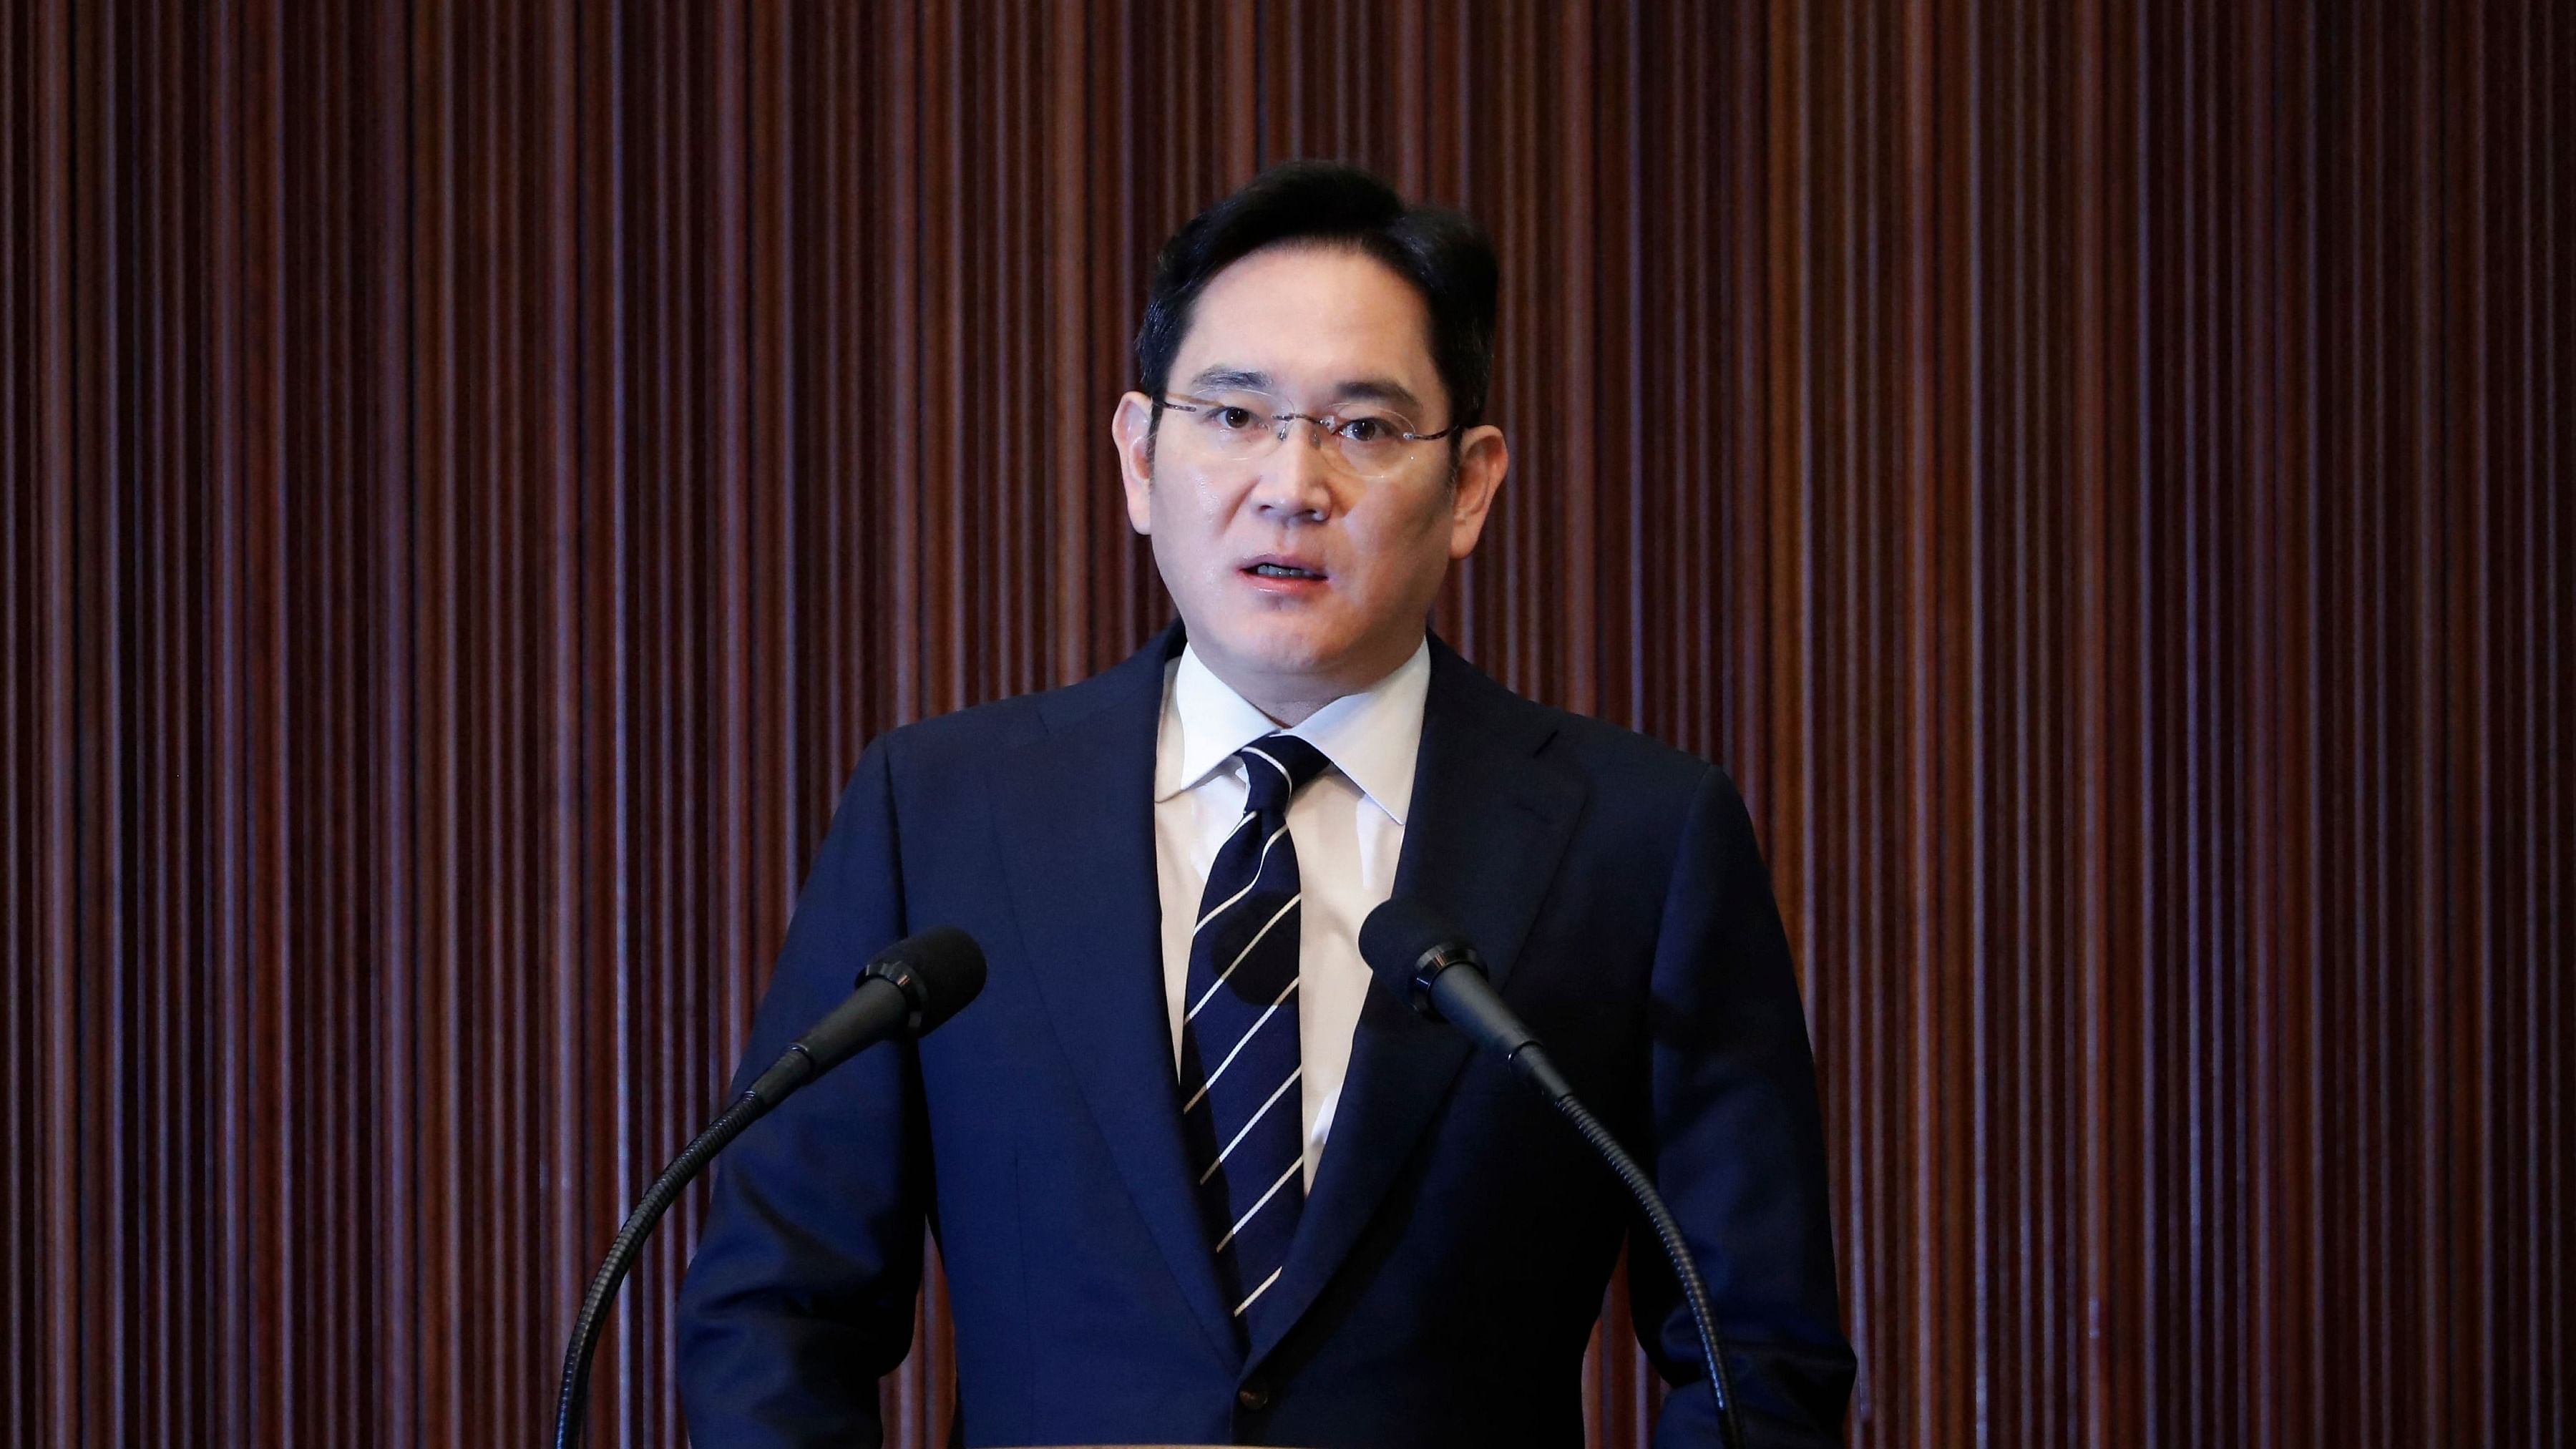 Vice-Chairman of Samsung Electronics Lee Jae-yong speaks during a news conference in Seoul. The heir and de facto leader of Samsung group received a presidential pardon on August 12, 2022. Credit: AFP File Photo